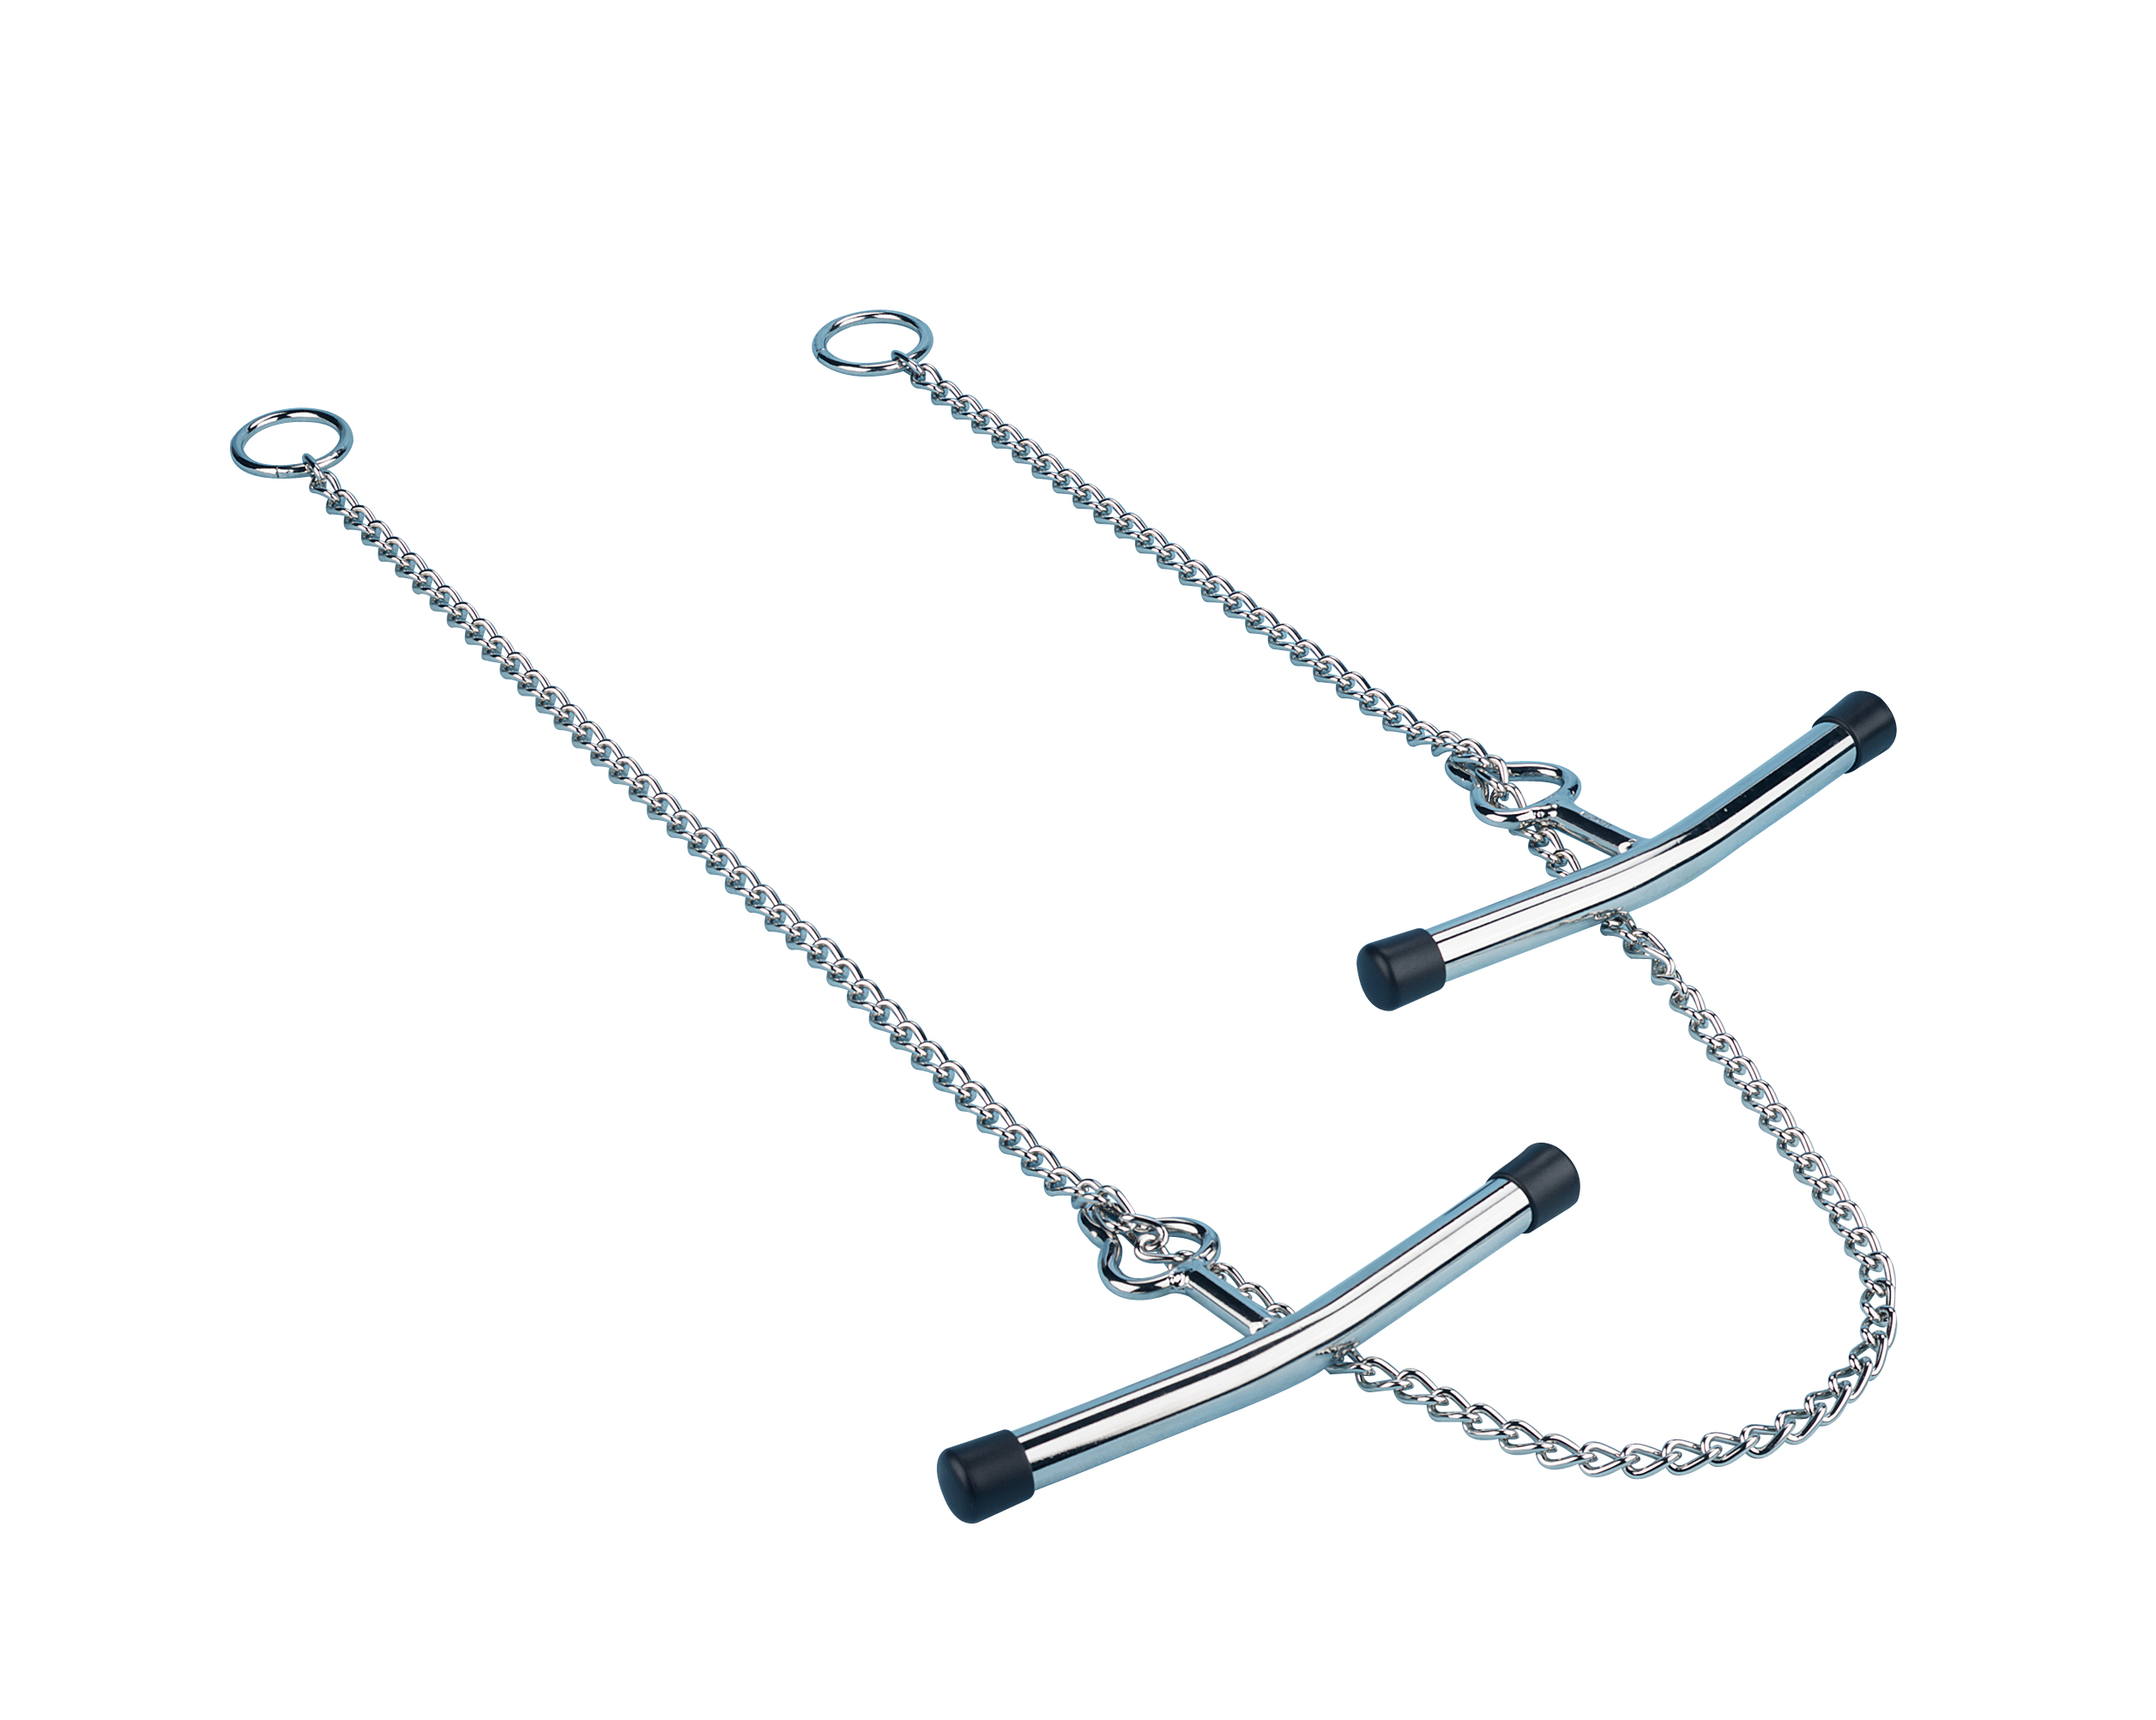 Obstetric chain with two handles